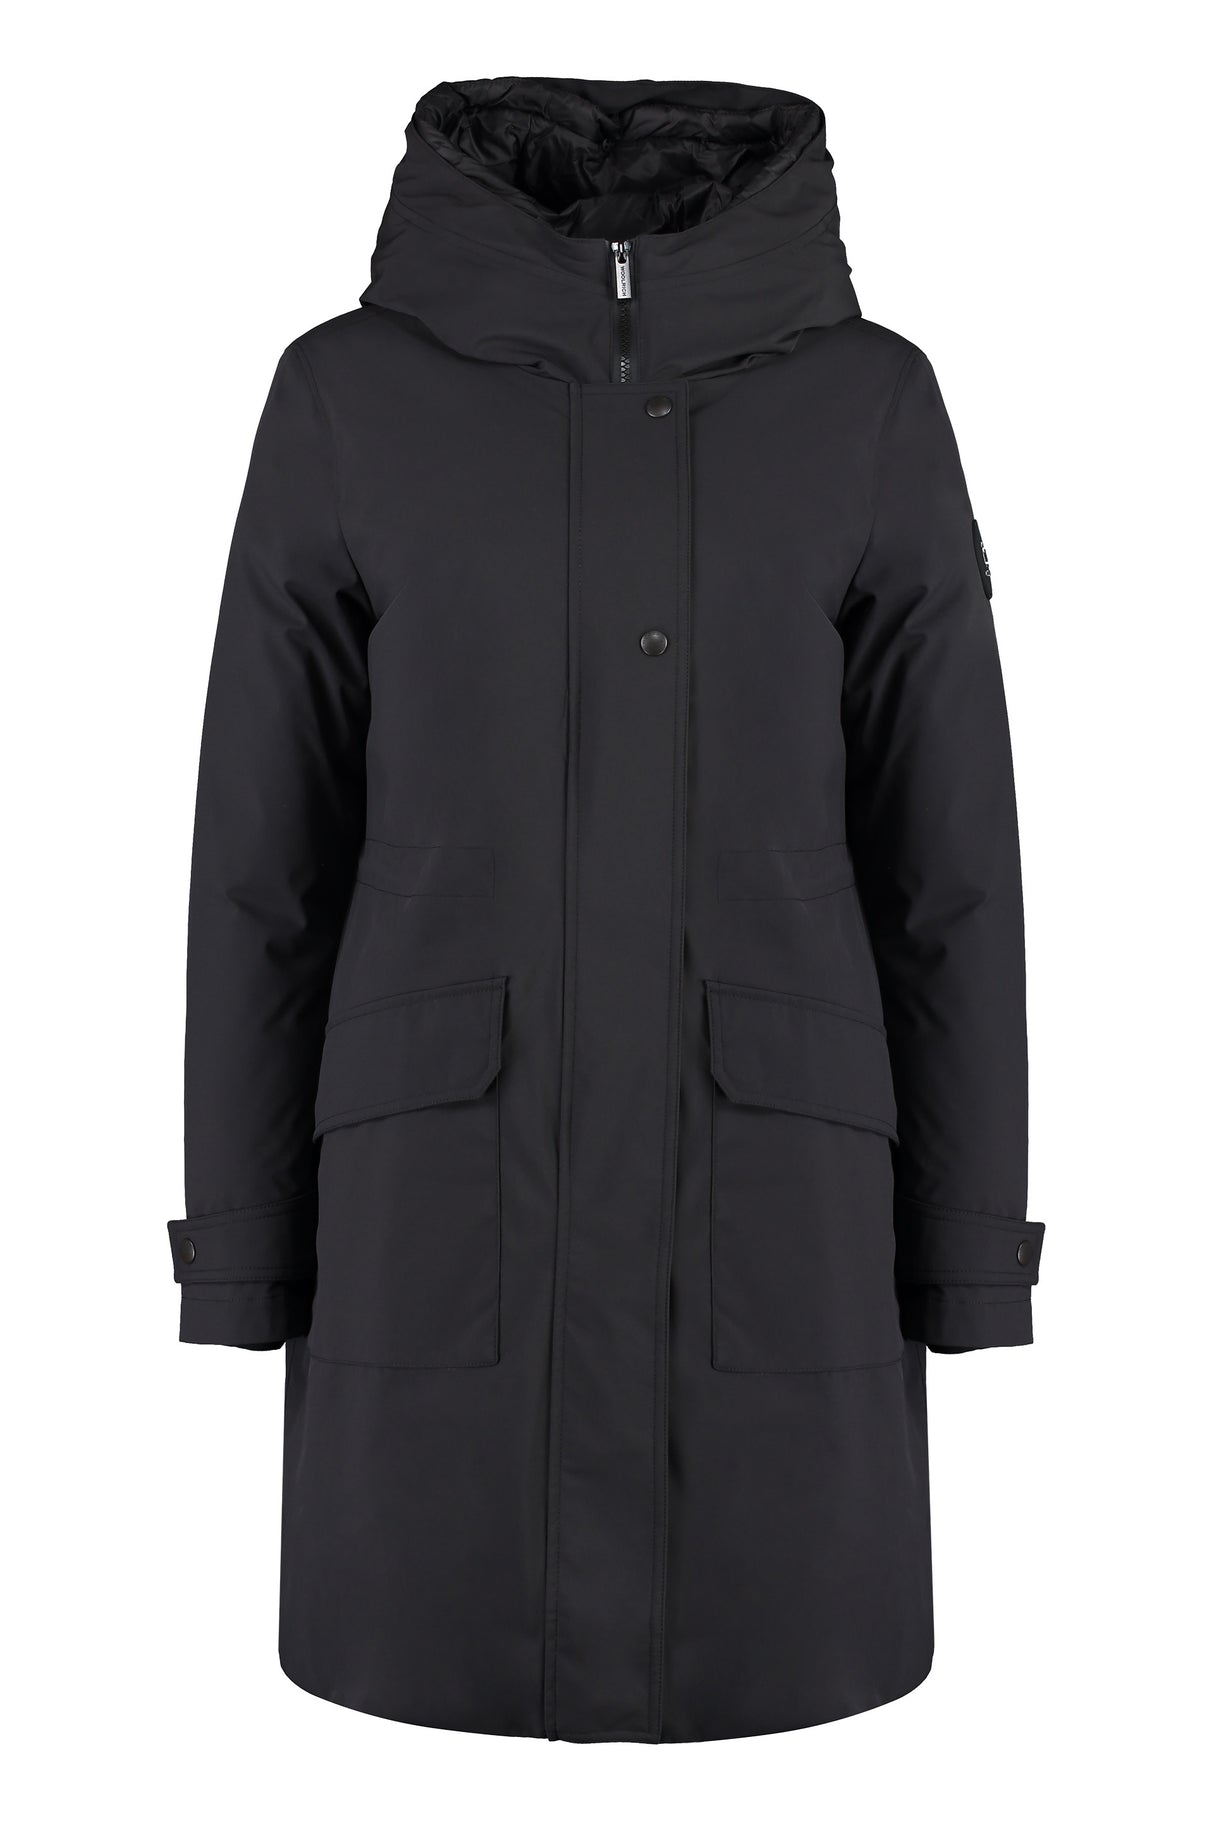 WOOLRICH Black Military Parka Jacket with Removable Down Jacket for Women - FW23